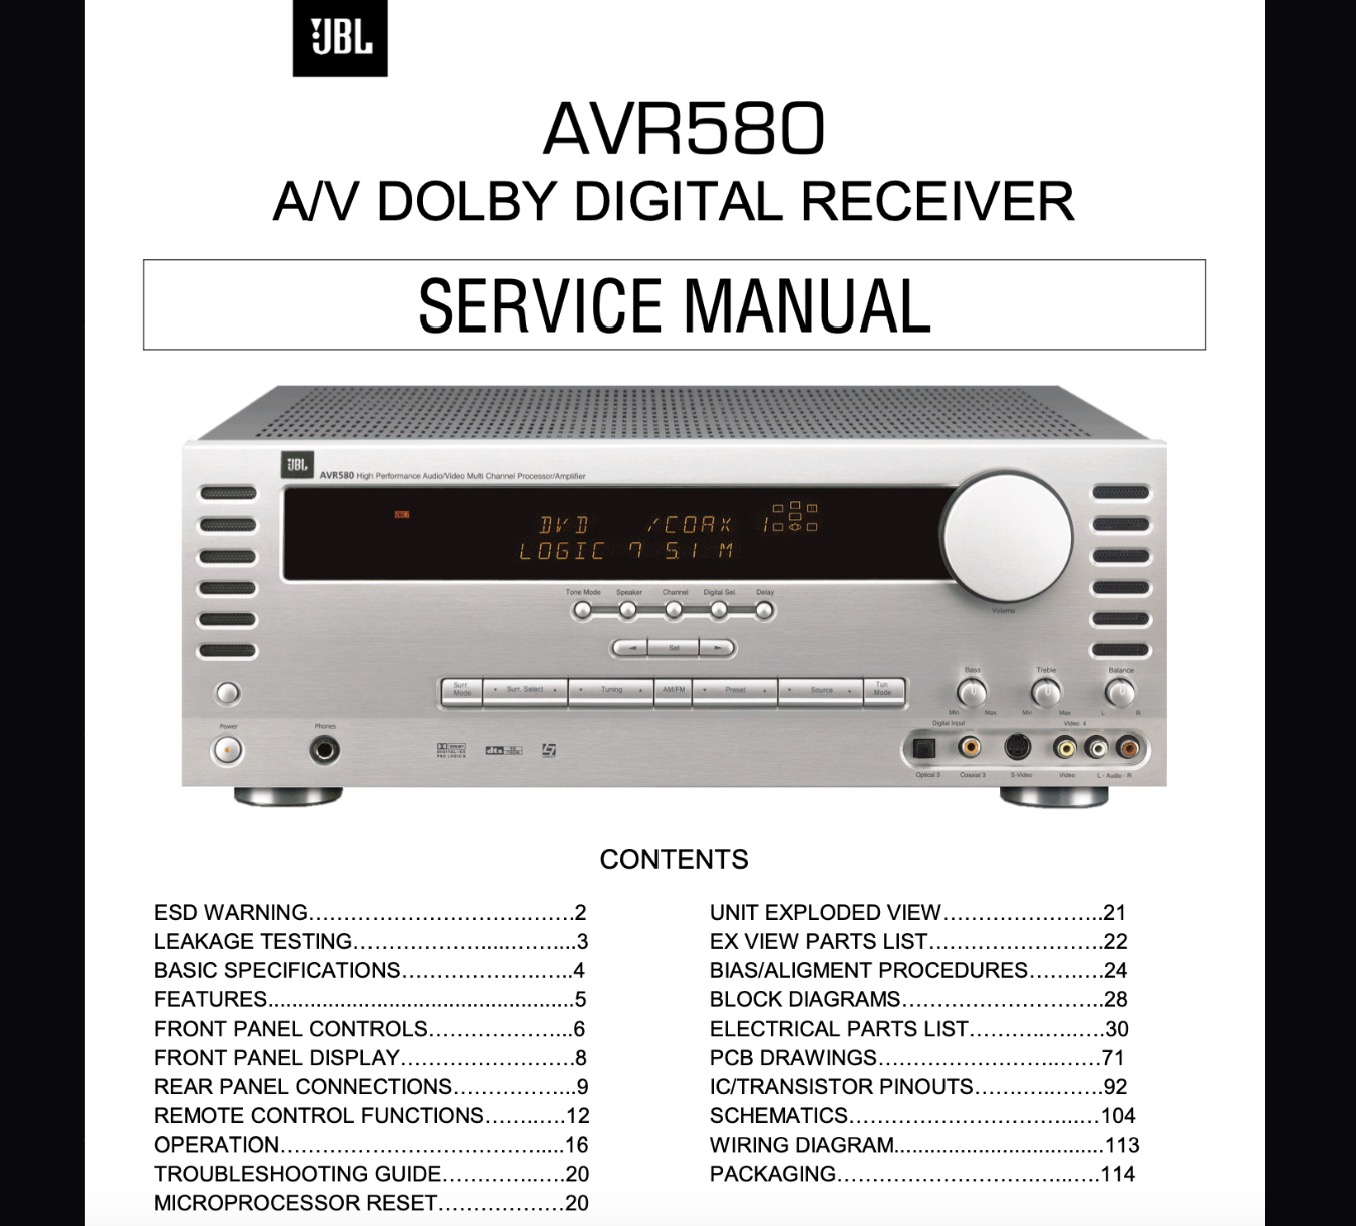 JBL AVR580 A/V Dolby Digital Receiver Service Manual, Exploded View, Schematic Diagram, Cirquit Board